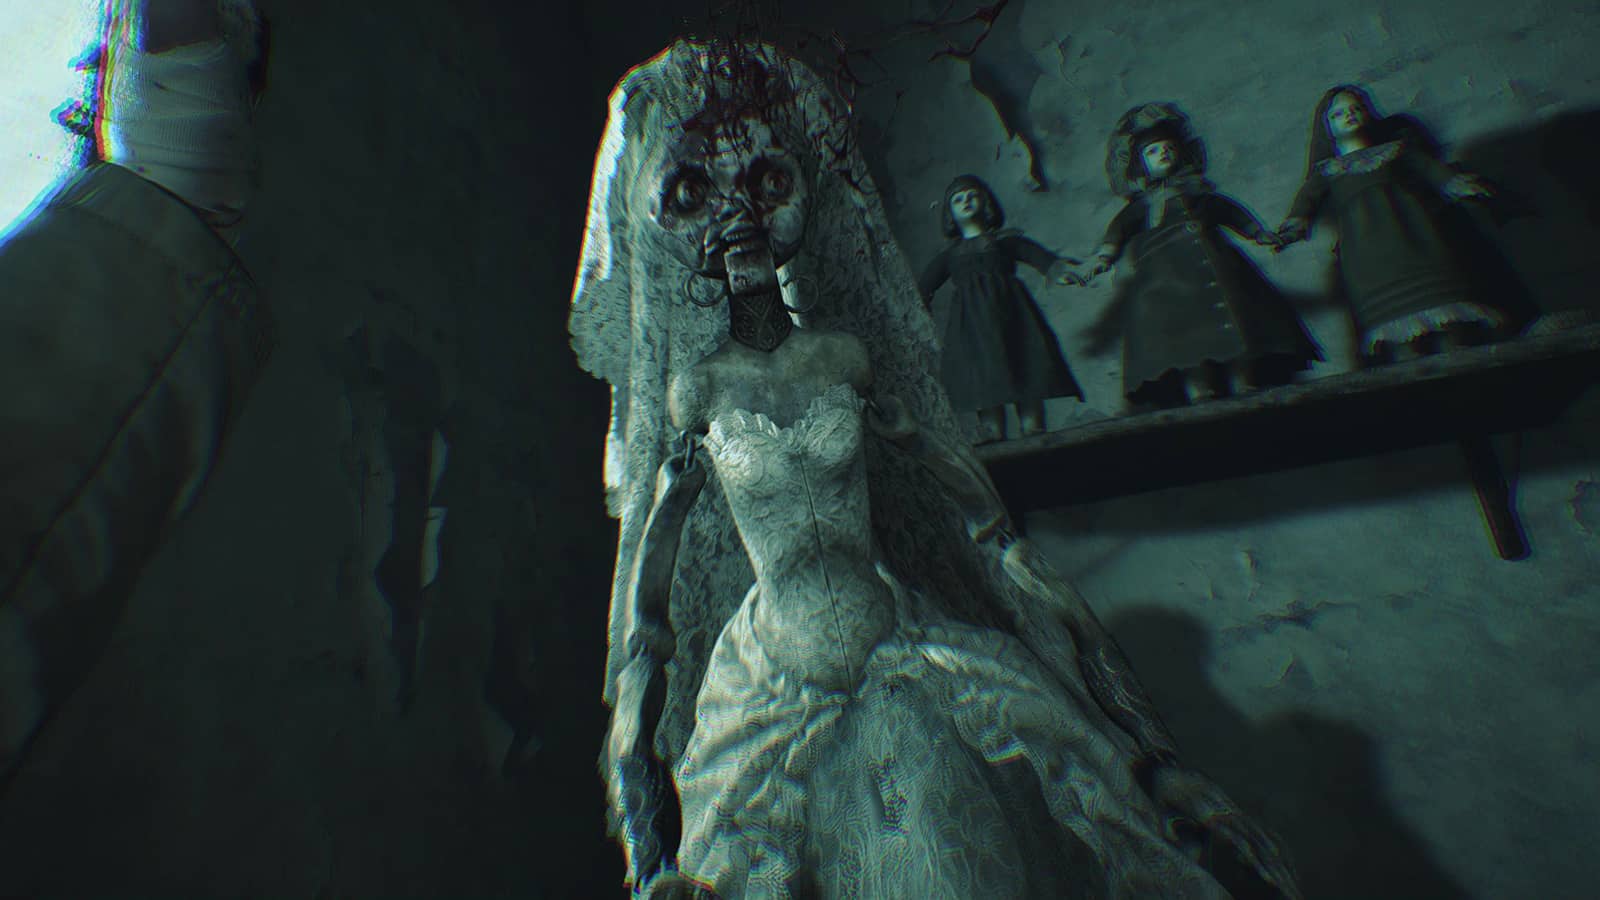 Resident Evil Village review: Apparently, good horror takes more than a  village